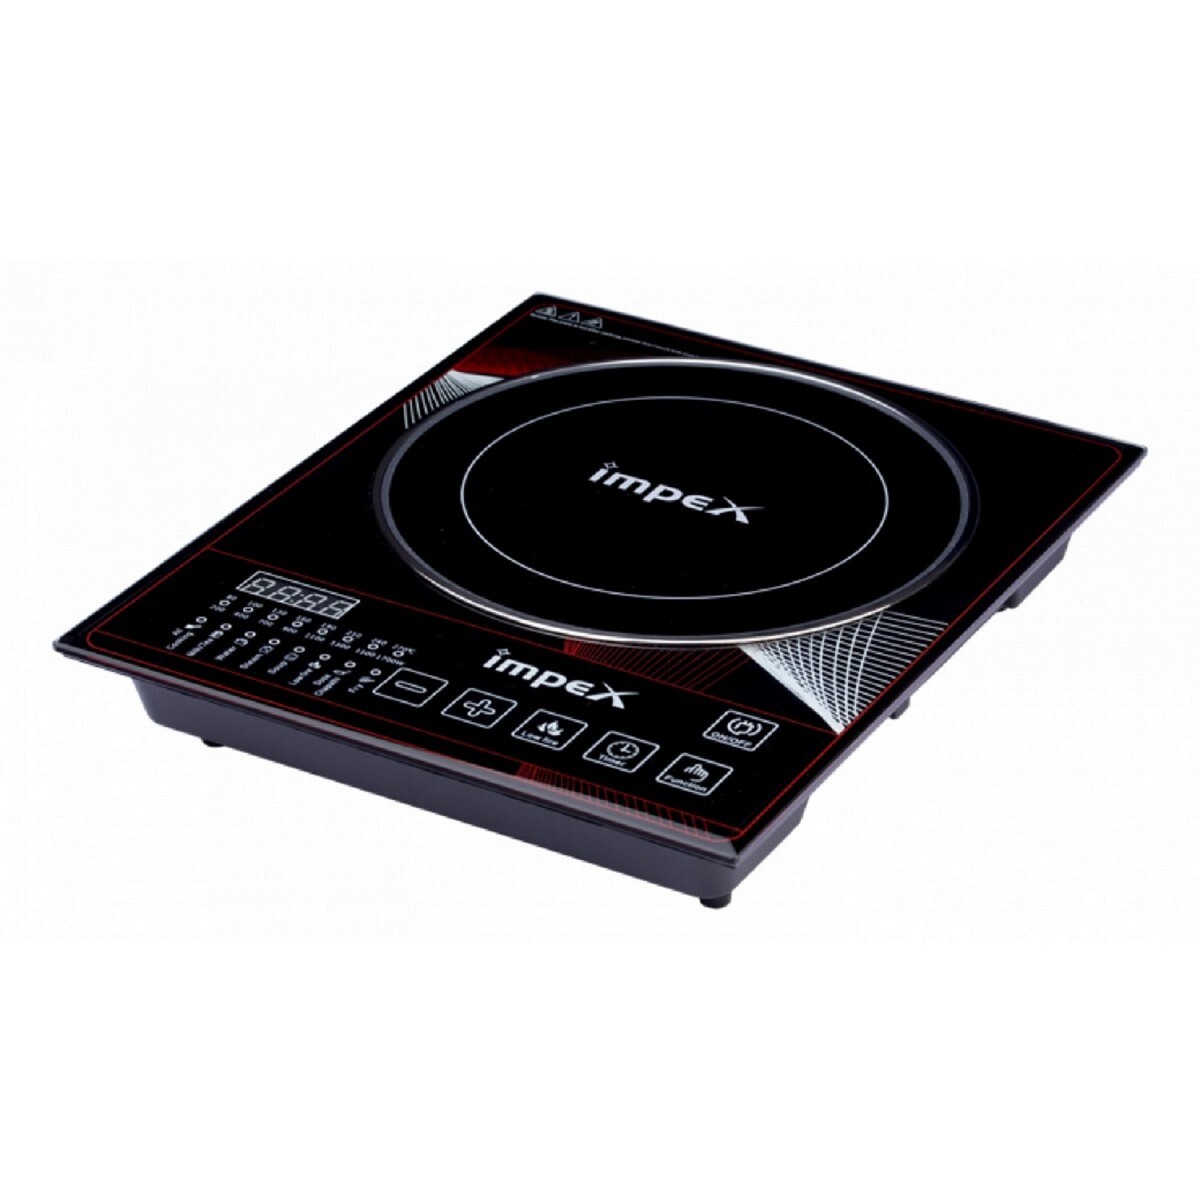 Impex Induction Cooker Omega H4